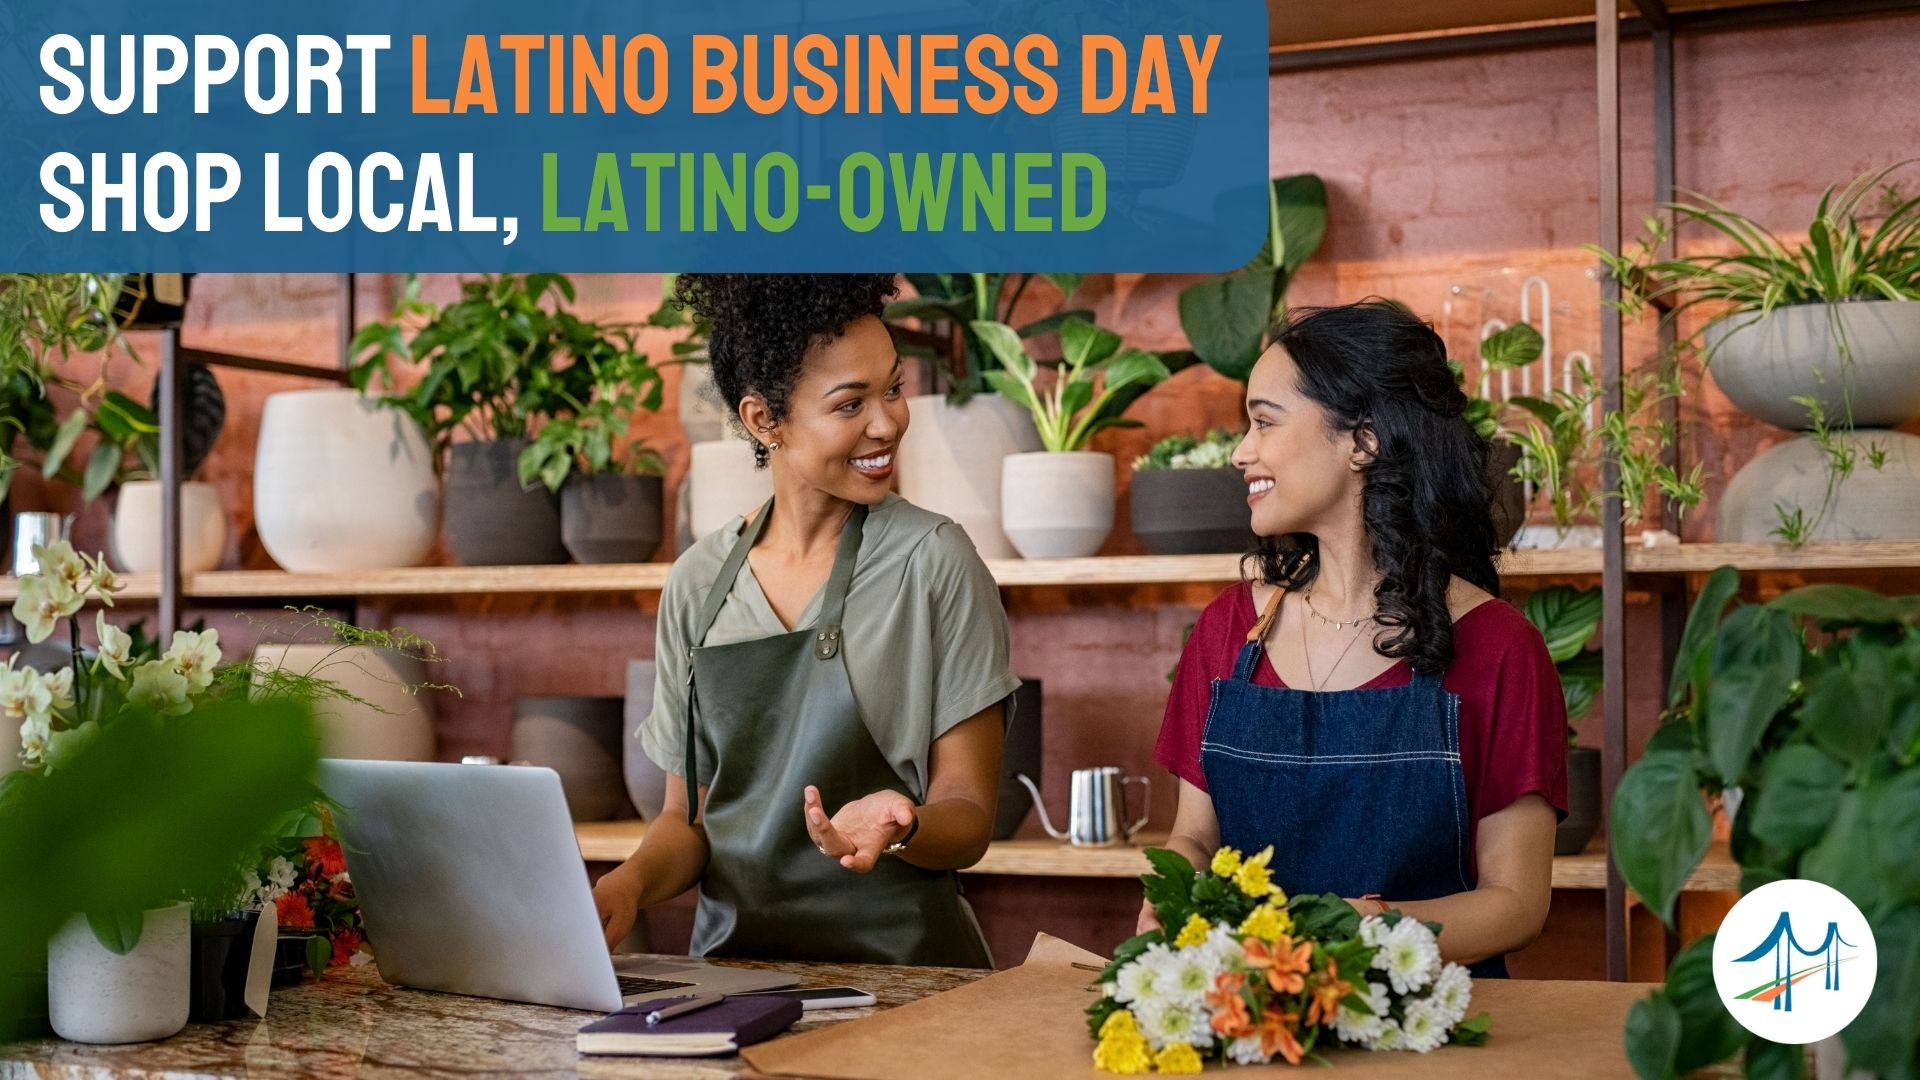 Support Latino Business Day: More than Diversity, it’s about SUSTAINABLE IMPACT!